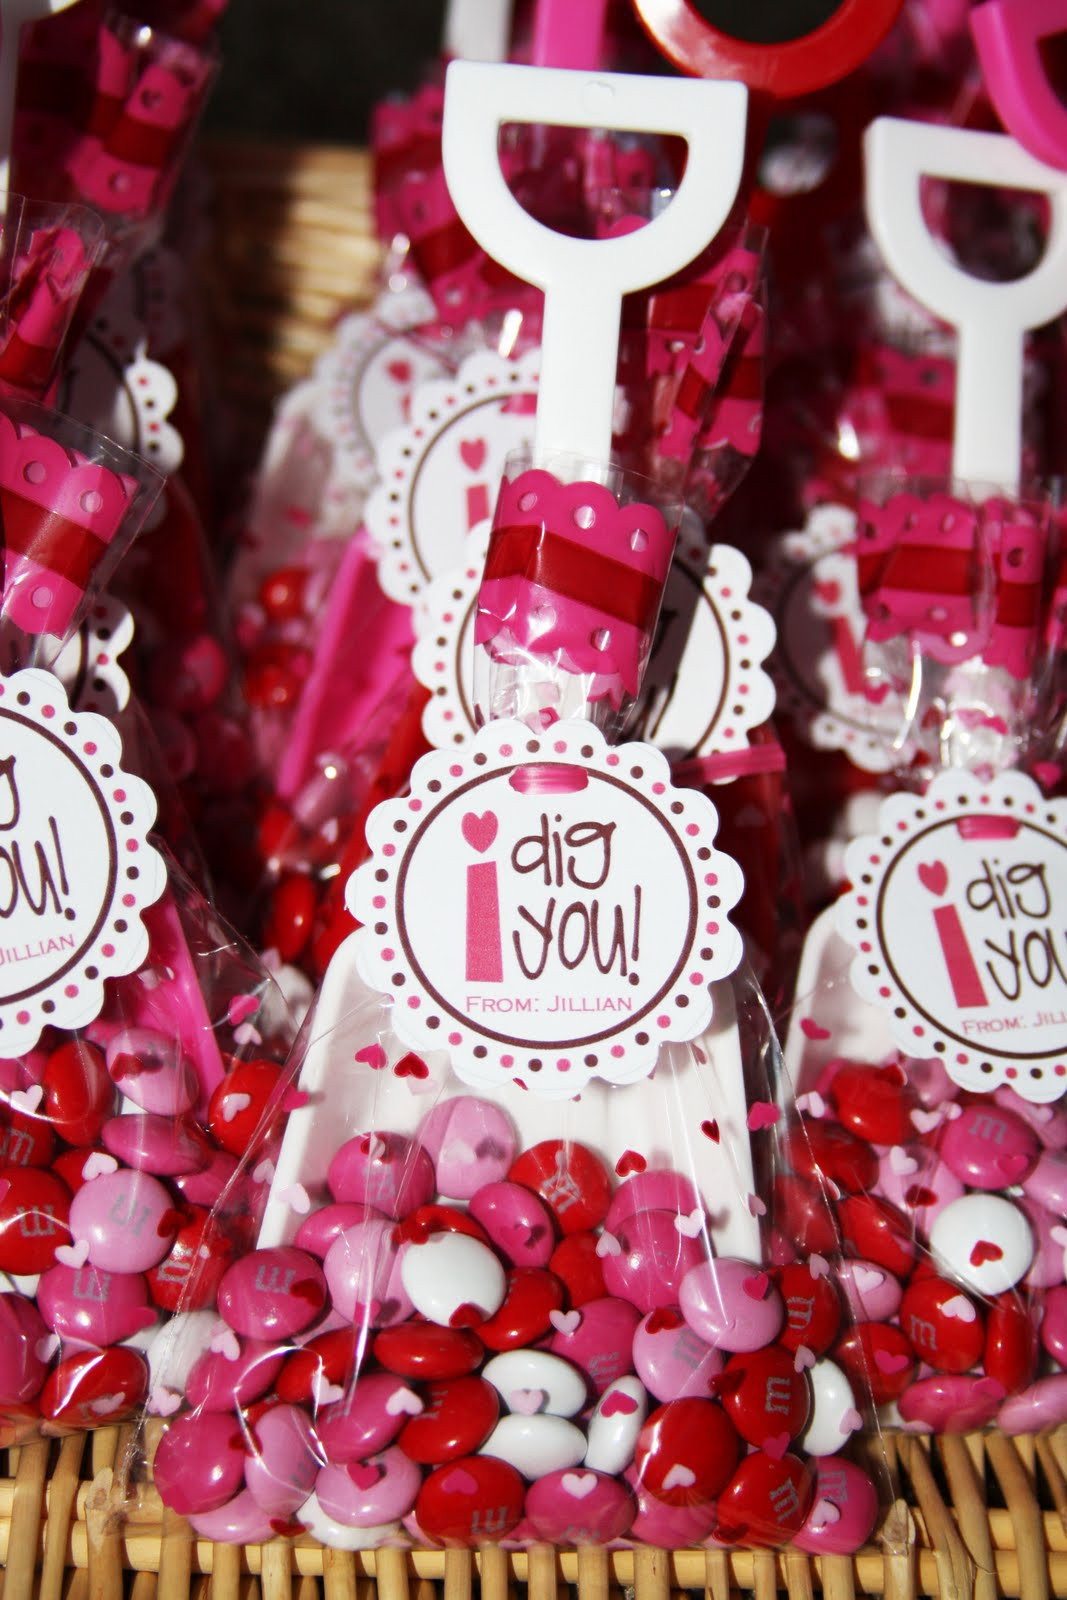 Valentine Day Gift Bags Ideas
 Cute Food For Kids Valentine s Day Treat Bag Ideas